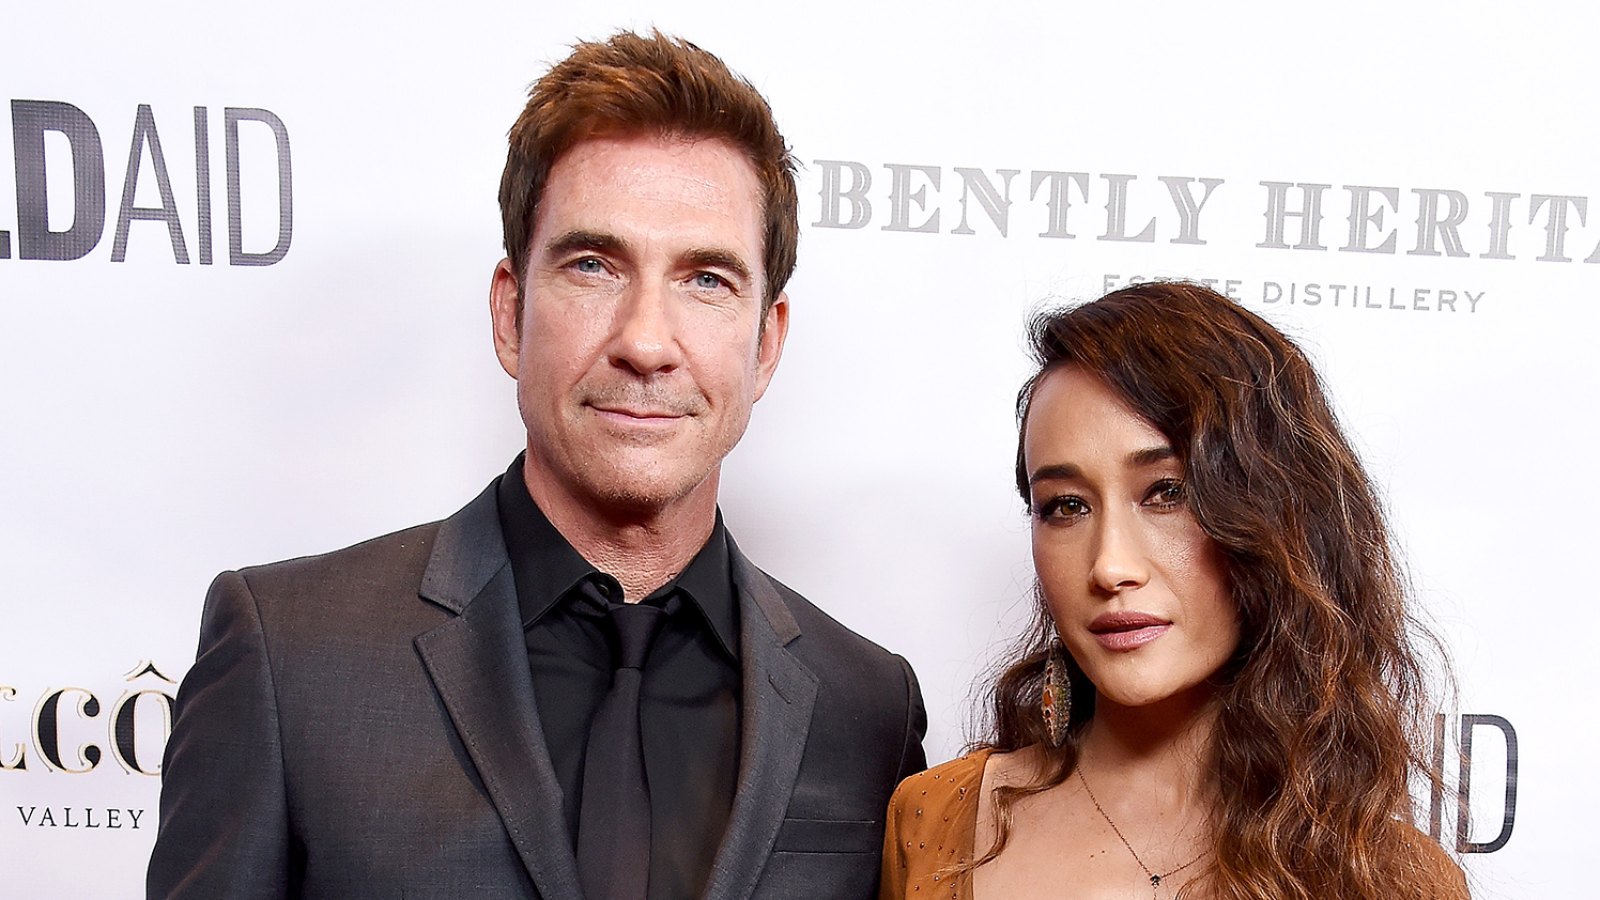 Dylan McDermott and Maggie Q Split After 4-Year Engagement